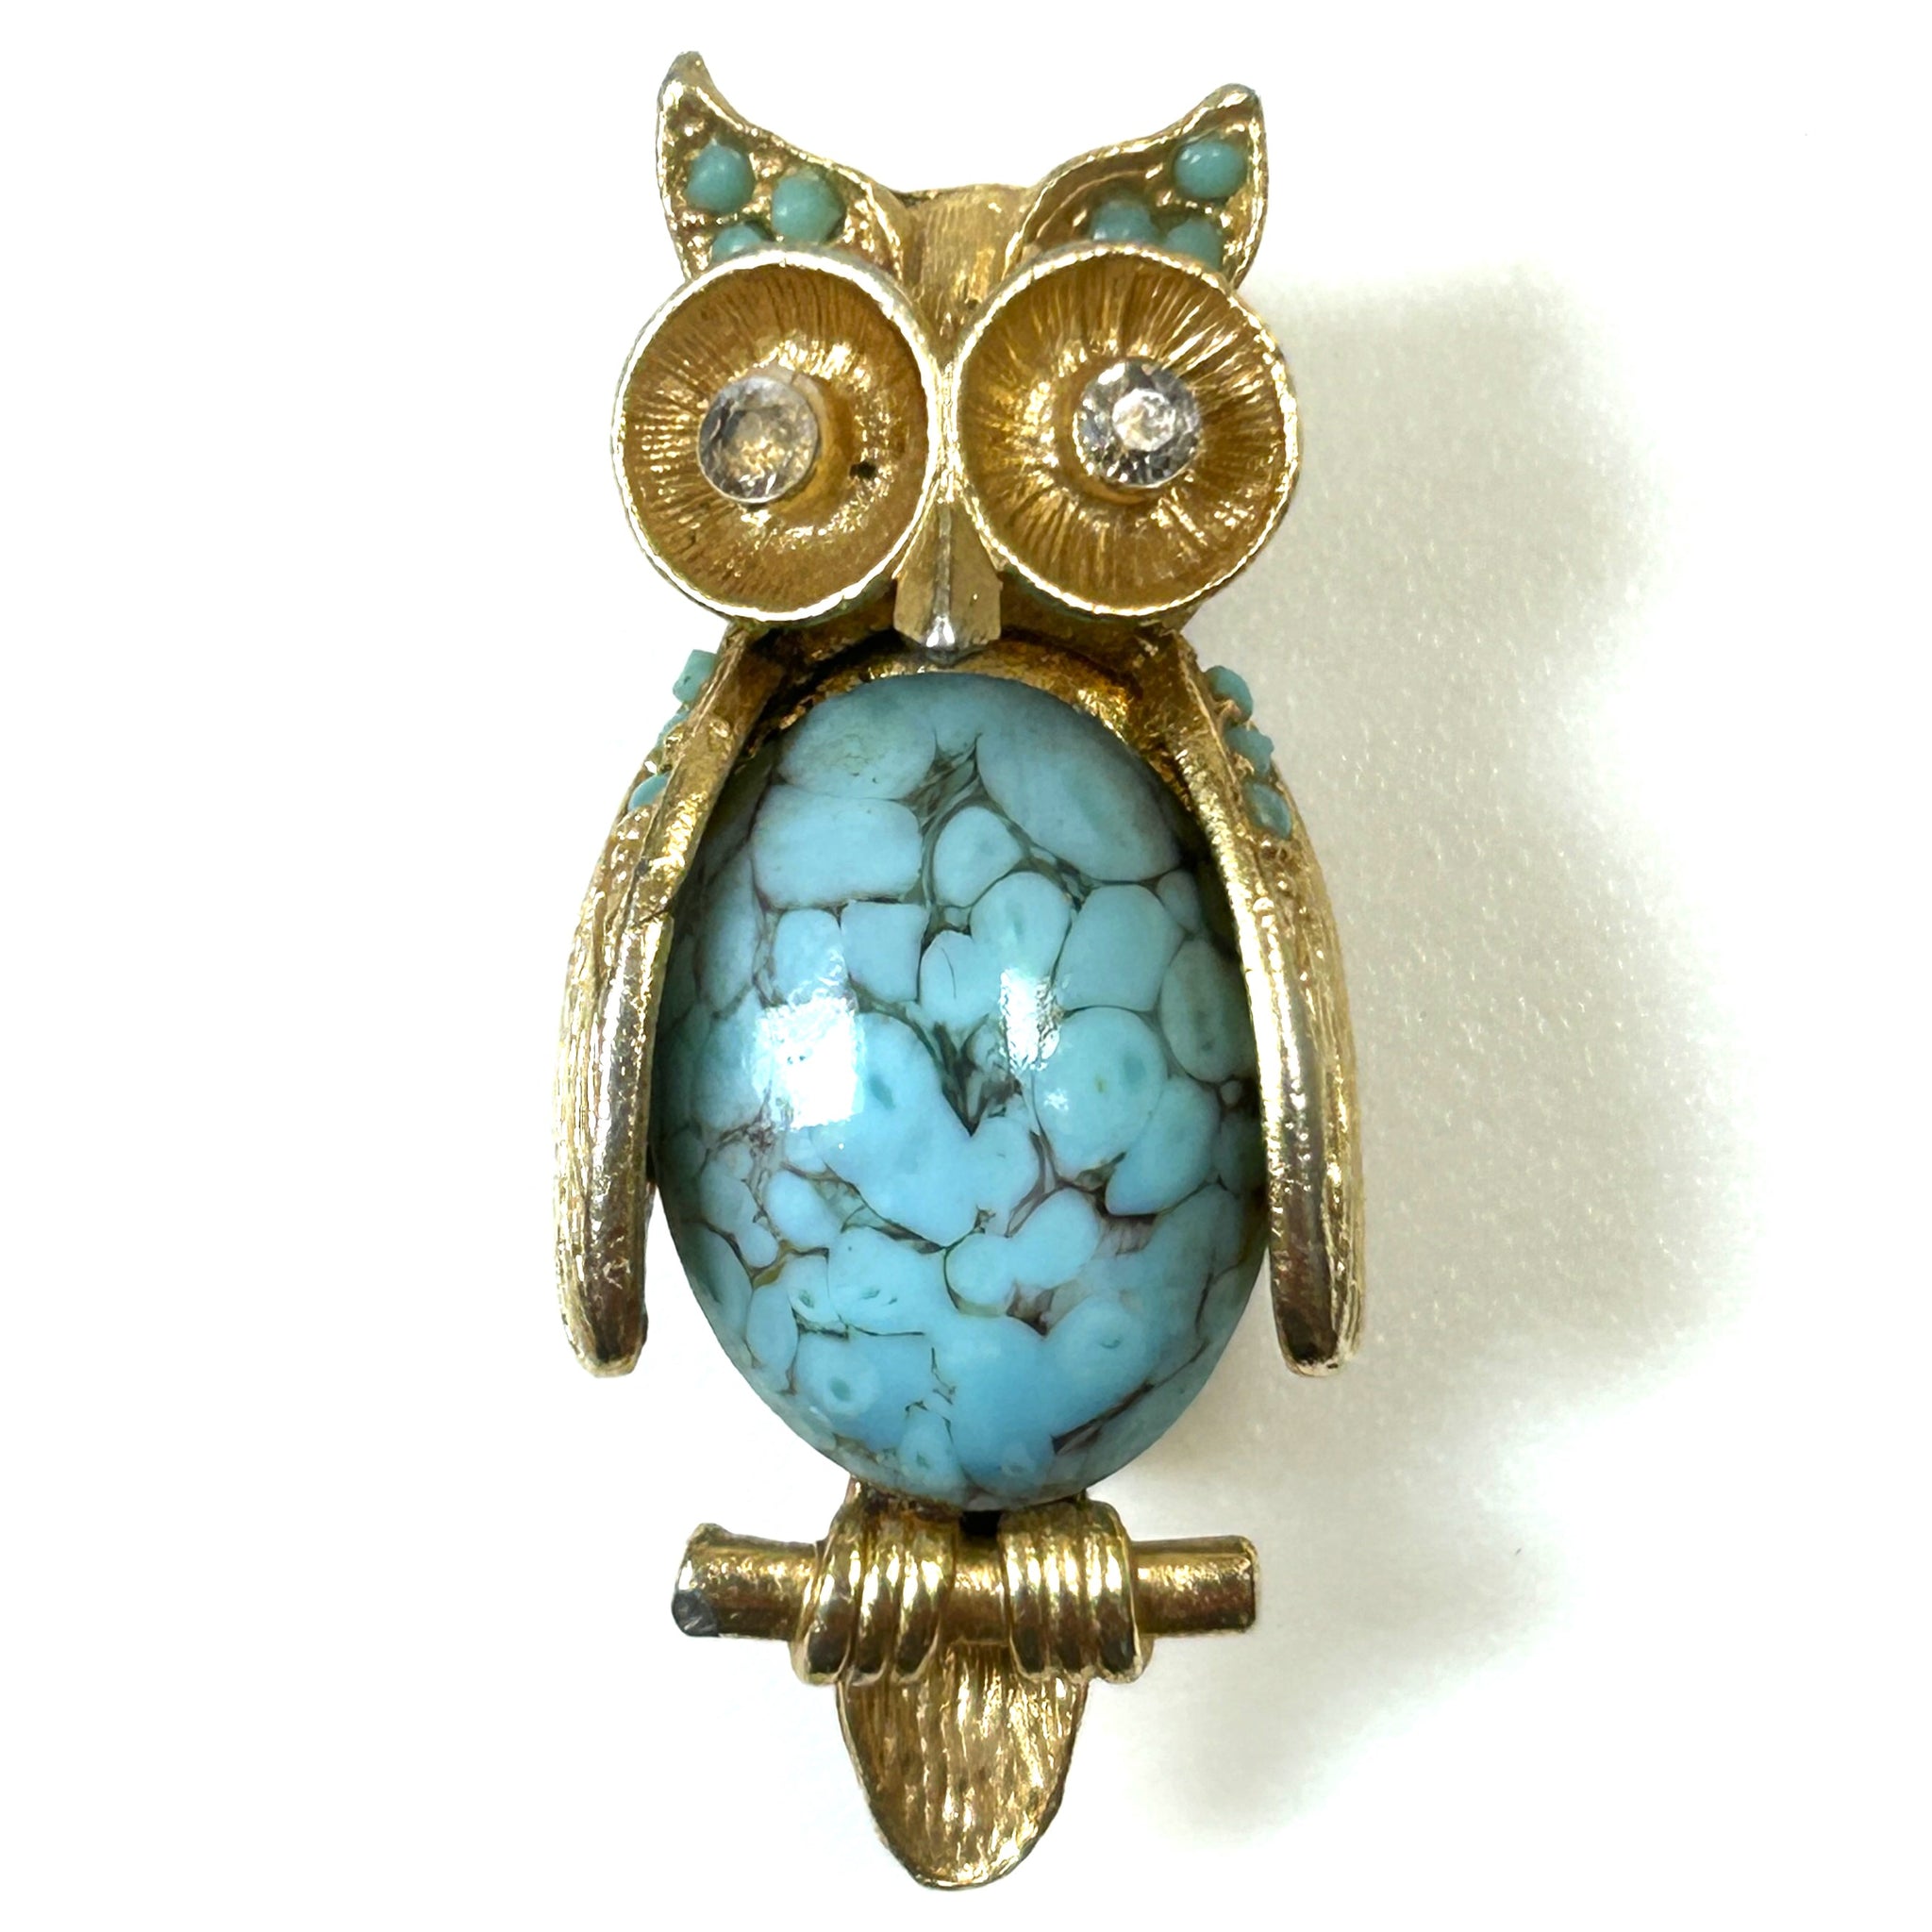 Yellow Metal and Turquoise Novelty “Owl” Brooch